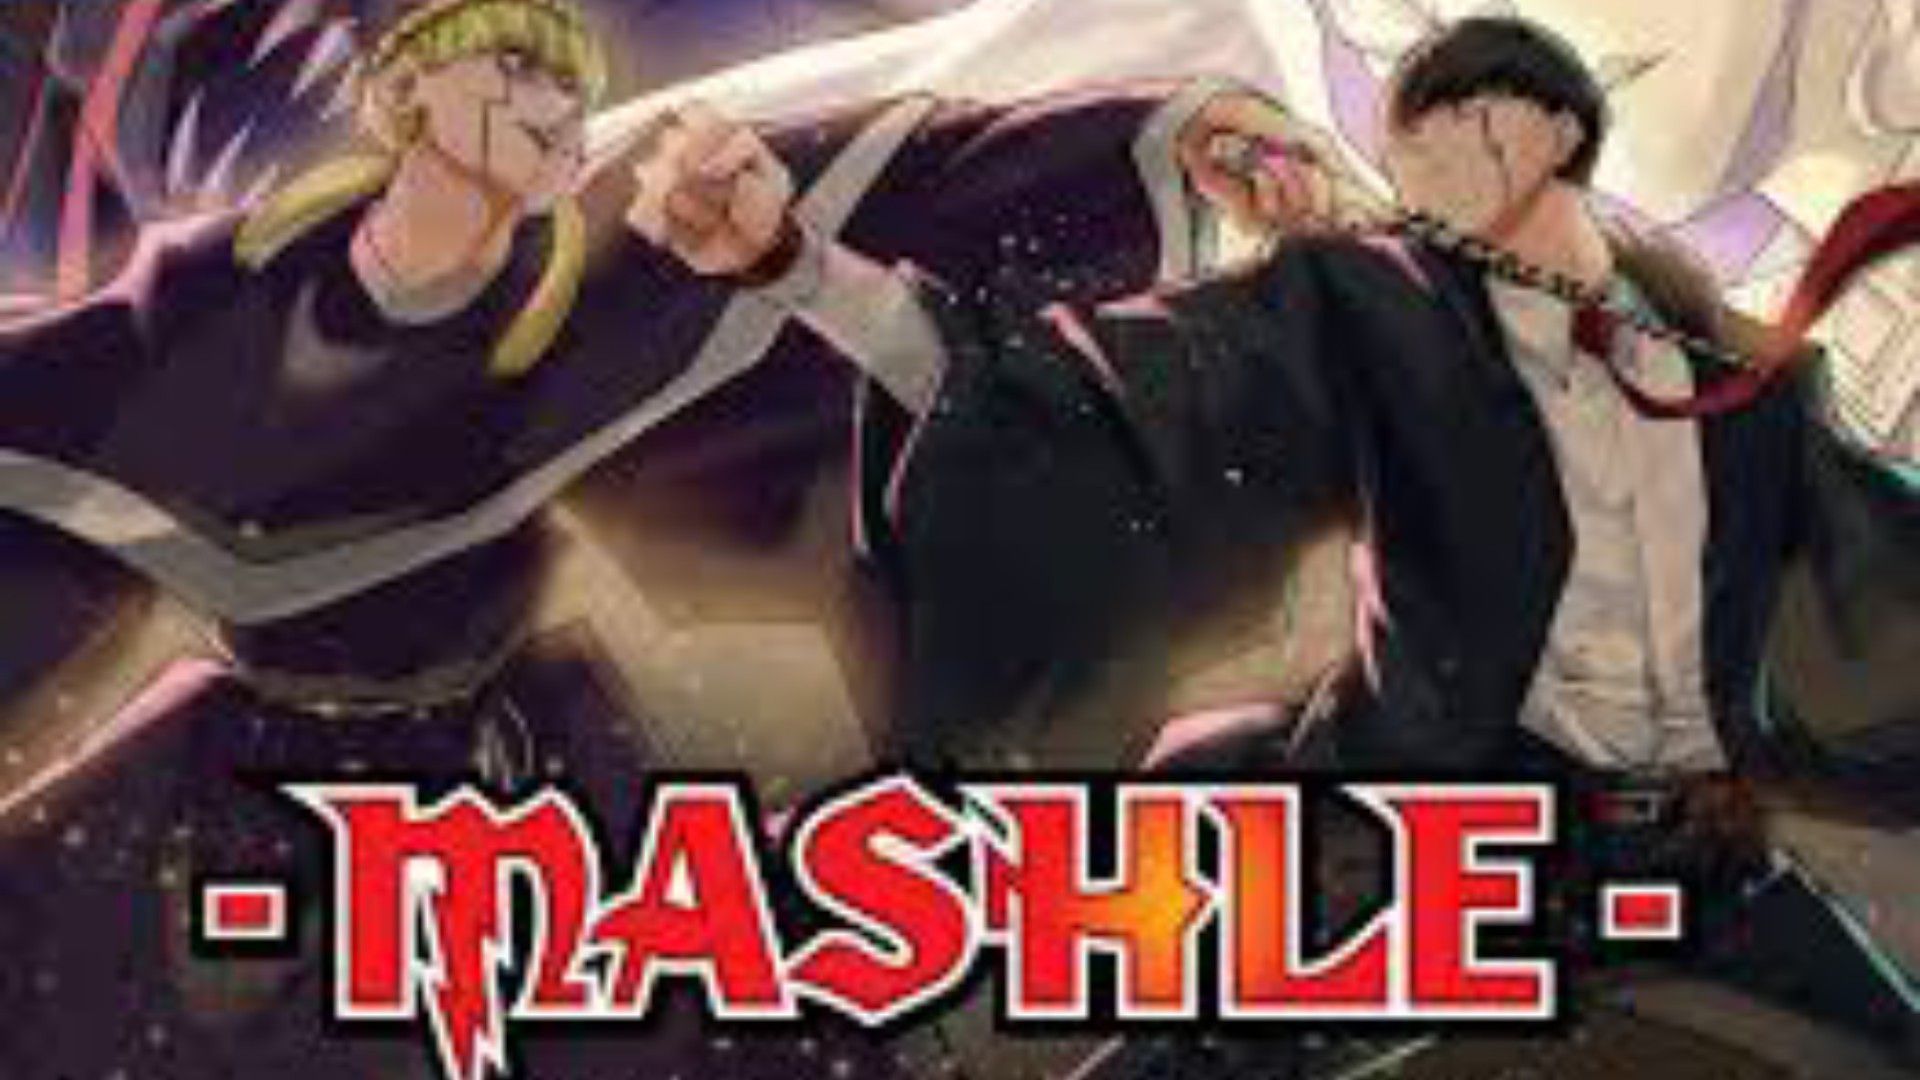 mashle magic and muscles episode 12,13,14,15 explained in hindi, 2023 new  anime in hindi